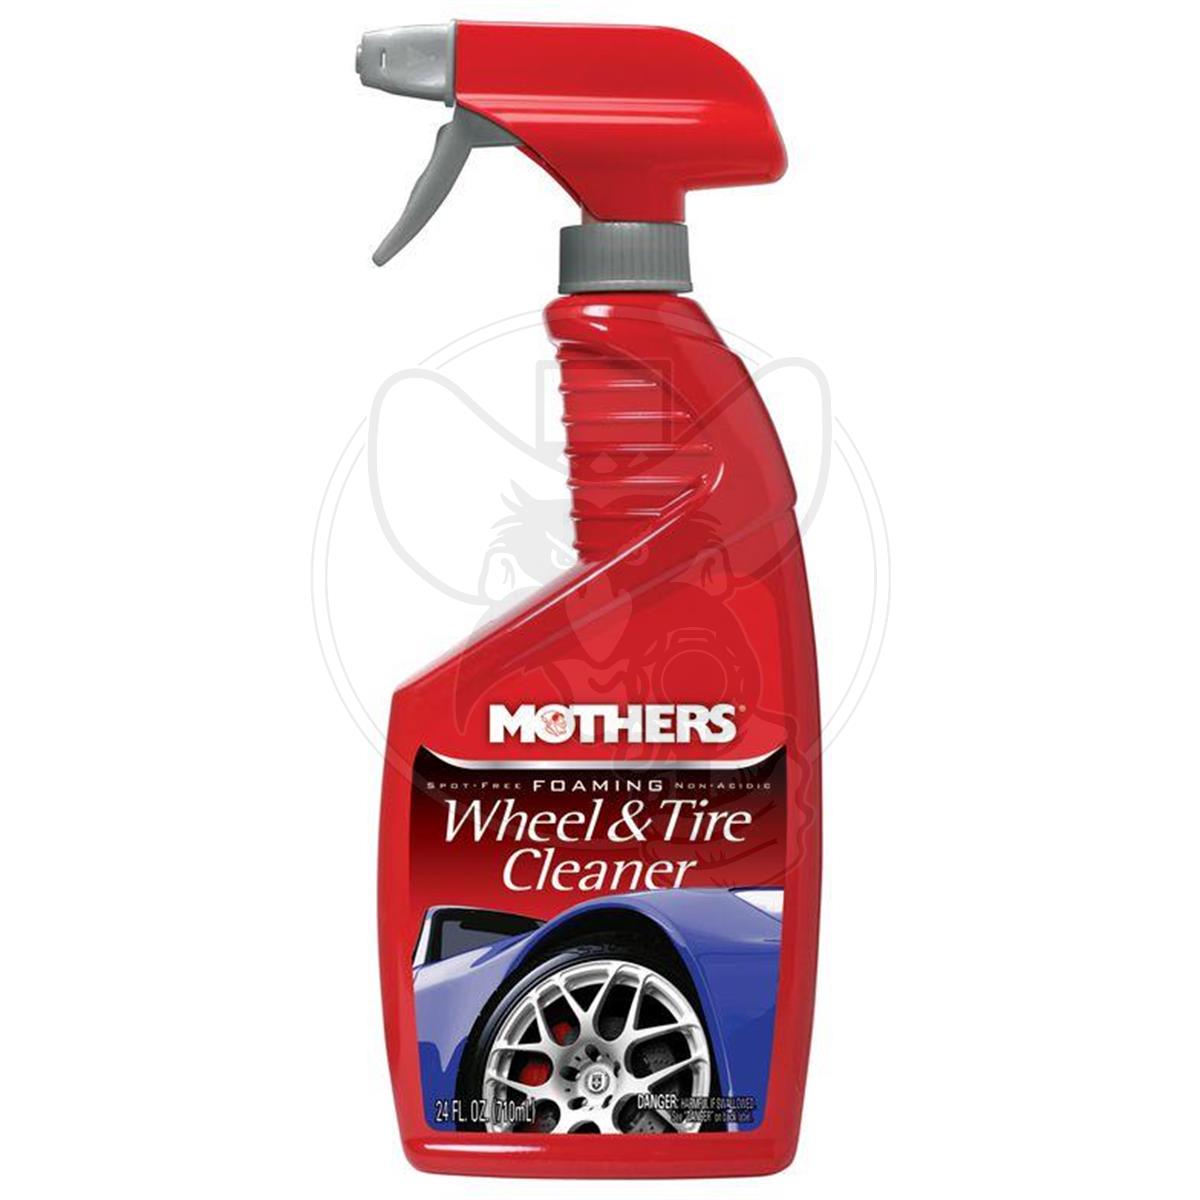 MOTHERS FOAMING WHEEL & TYRE CLEANER 710ML / 24 OUNCE